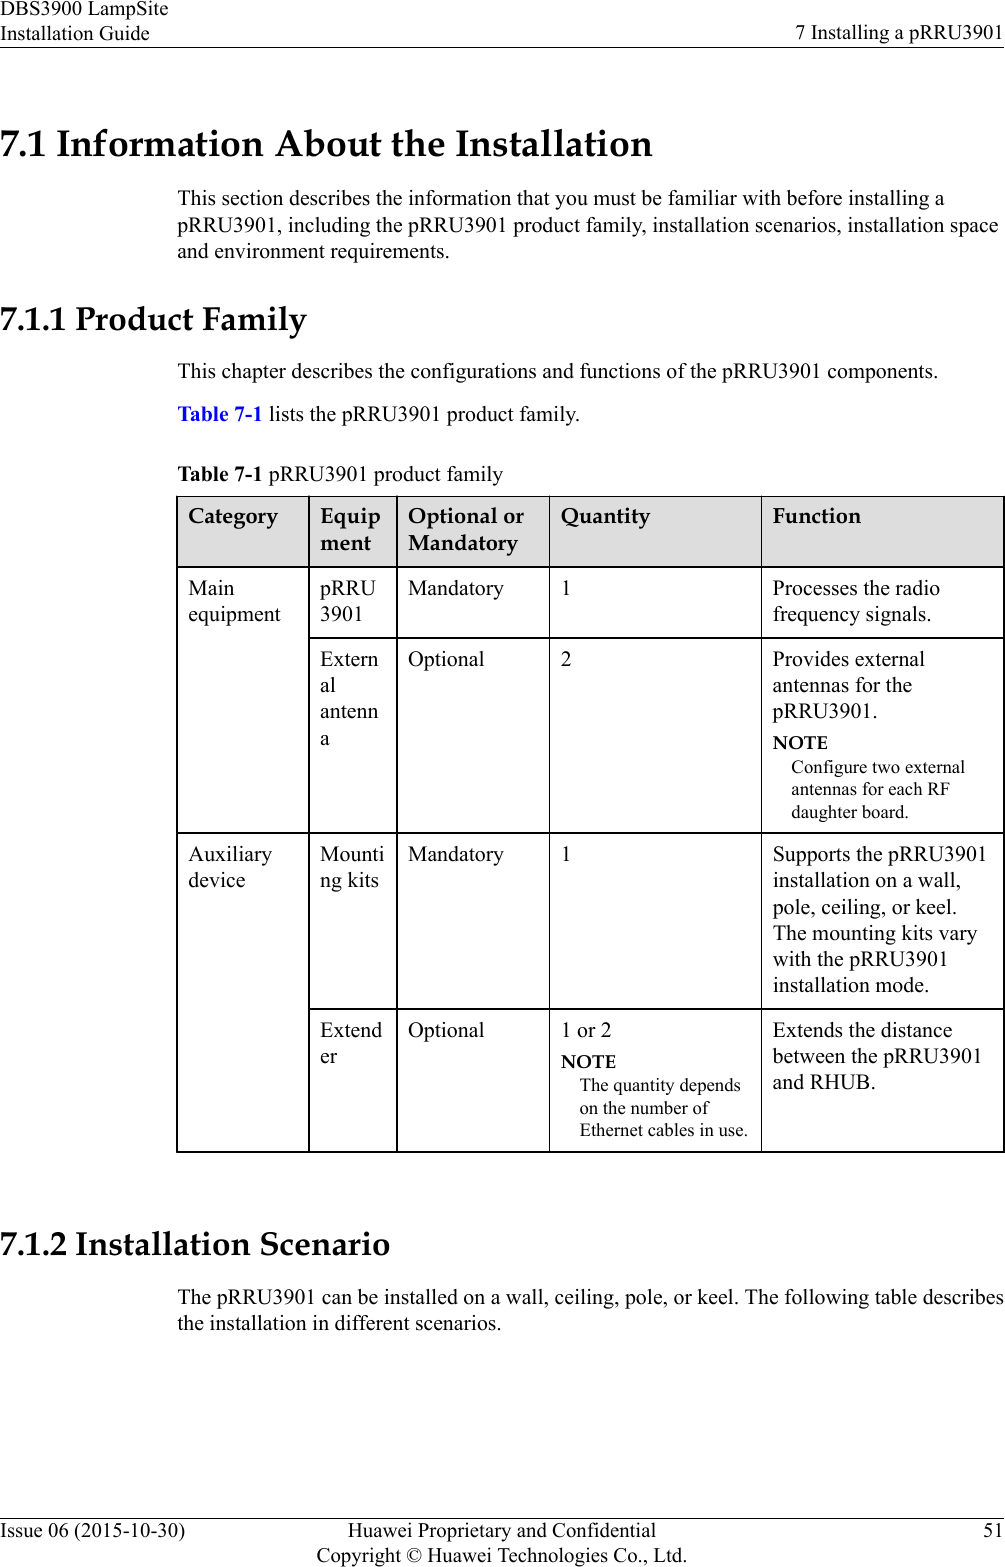 7.1 Information About the InstallationThis section describes the information that you must be familiar with before installing apRRU3901, including the pRRU3901 product family, installation scenarios, installation spaceand environment requirements.7.1.1 Product FamilyThis chapter describes the configurations and functions of the pRRU3901 components.Table 7-1 lists the pRRU3901 product family.Table 7-1 pRRU3901 product familyCategory EquipmentOptional orMandatoryQuantity FunctionMainequipmentpRRU3901Mandatory 1 Processes the radiofrequency signals.ExternalantennaOptional 2 Provides externalantennas for thepRRU3901.NOTEConfigure two externalantennas for each RFdaughter board.AuxiliarydeviceMounting kitsMandatory 1 Supports the pRRU3901installation on a wall,pole, ceiling, or keel.The mounting kits varywith the pRRU3901installation mode.ExtenderOptional 1 or 2NOTEThe quantity dependson the number ofEthernet cables in use.Extends the distancebetween the pRRU3901and RHUB. 7.1.2 Installation ScenarioThe pRRU3901 can be installed on a wall, ceiling, pole, or keel. The following table describesthe installation in different scenarios.DBS3900 LampSiteInstallation Guide 7 Installing a pRRU3901Issue 06 (2015-10-30) Huawei Proprietary and ConfidentialCopyright © Huawei Technologies Co., Ltd.51